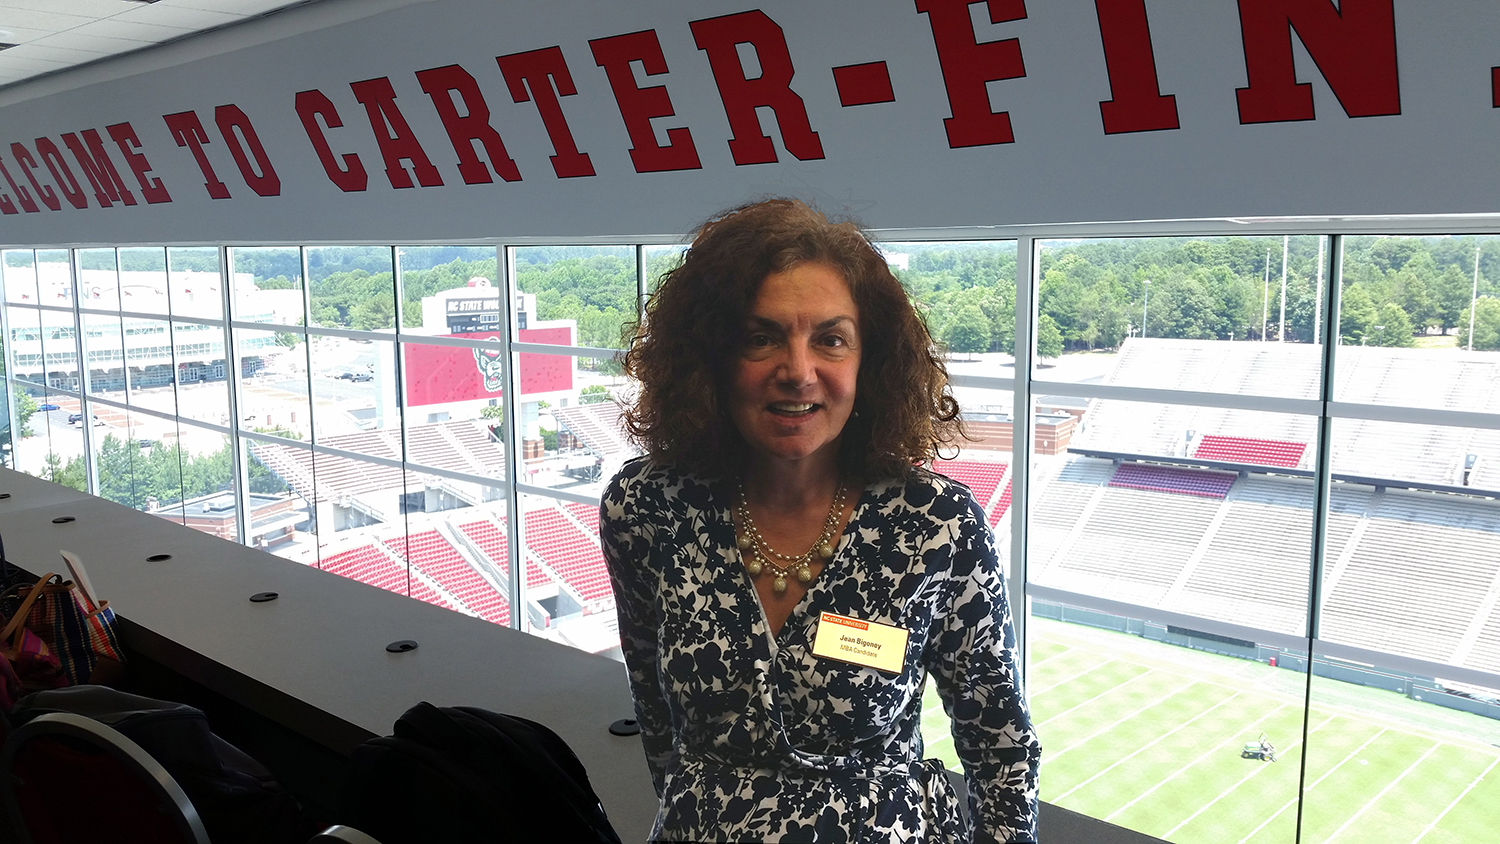 Jean Bigoney at one of the Jenkins Professional Online MBA Program Raleigh Residency events. Jean is pictured in the suites at Carter Finley Stadium overlooking the field.